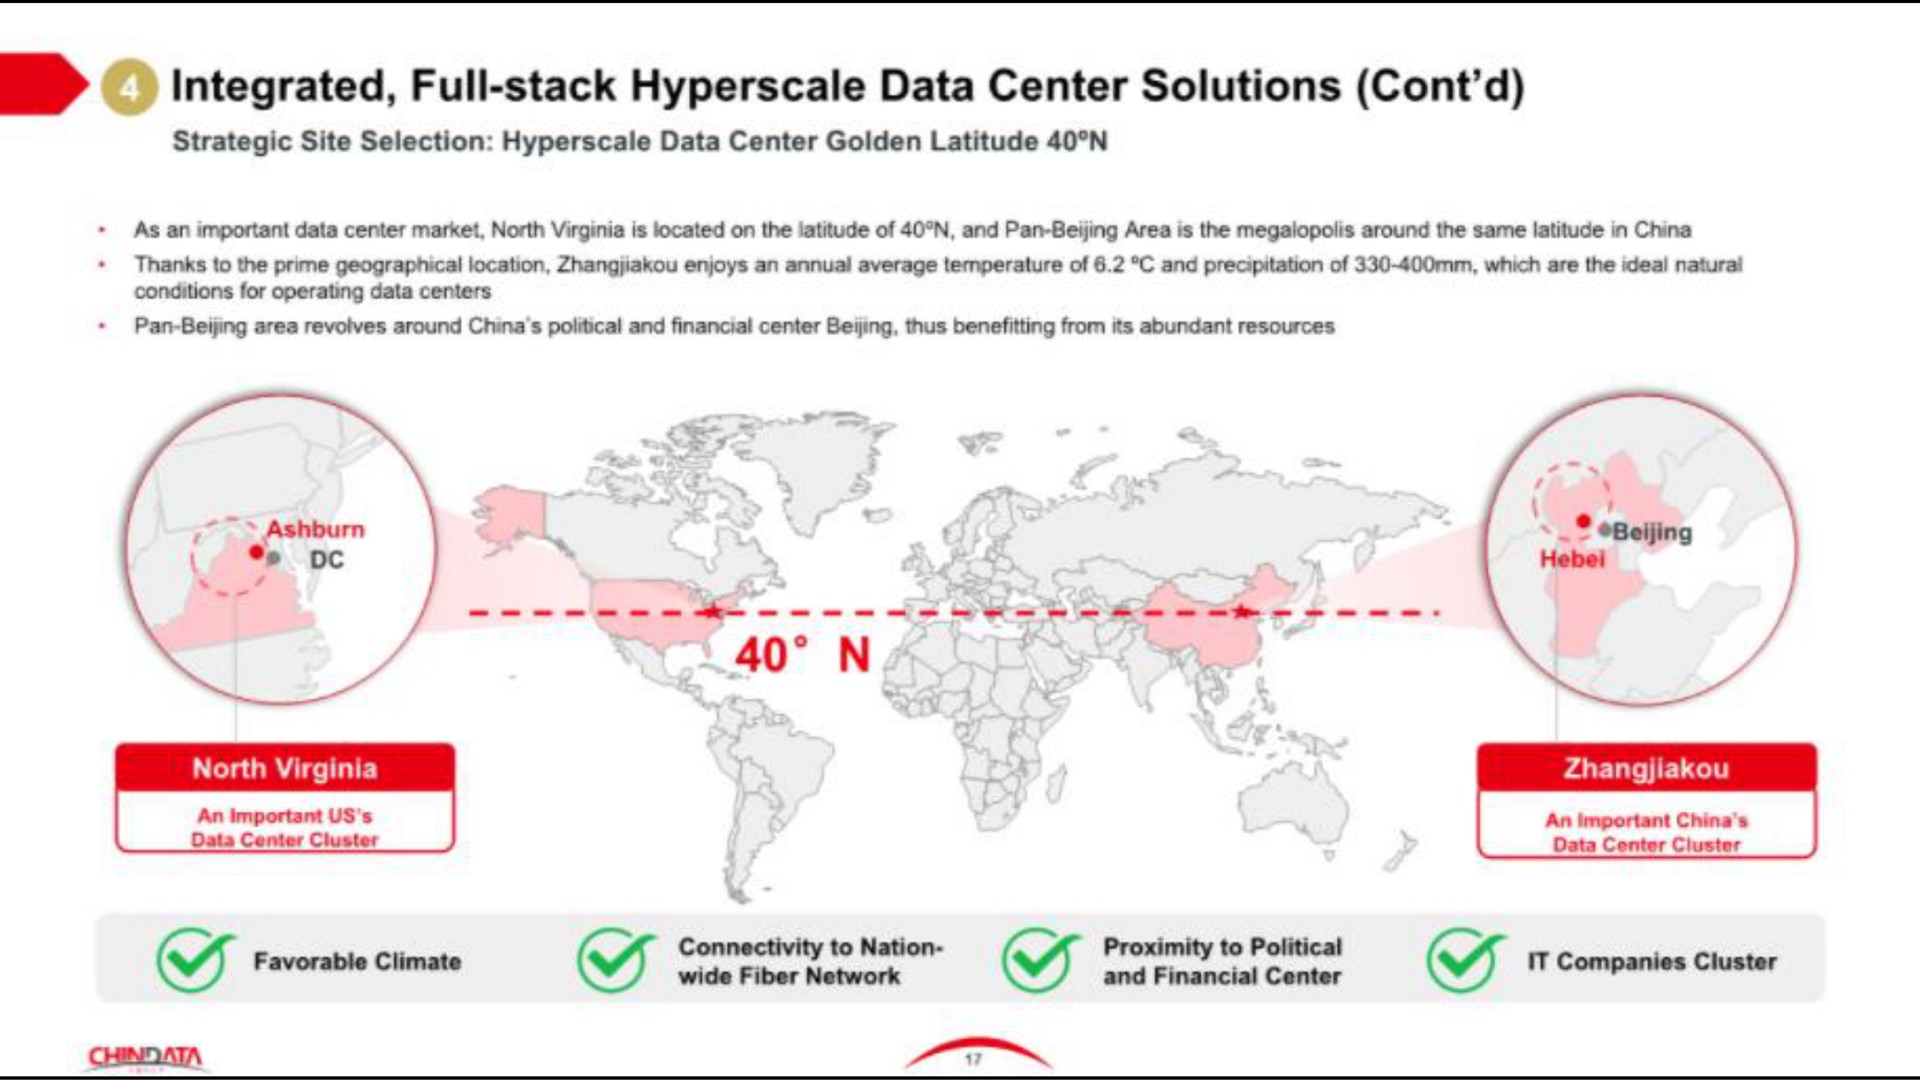 integrated full stack data center solutions | Chindata Group